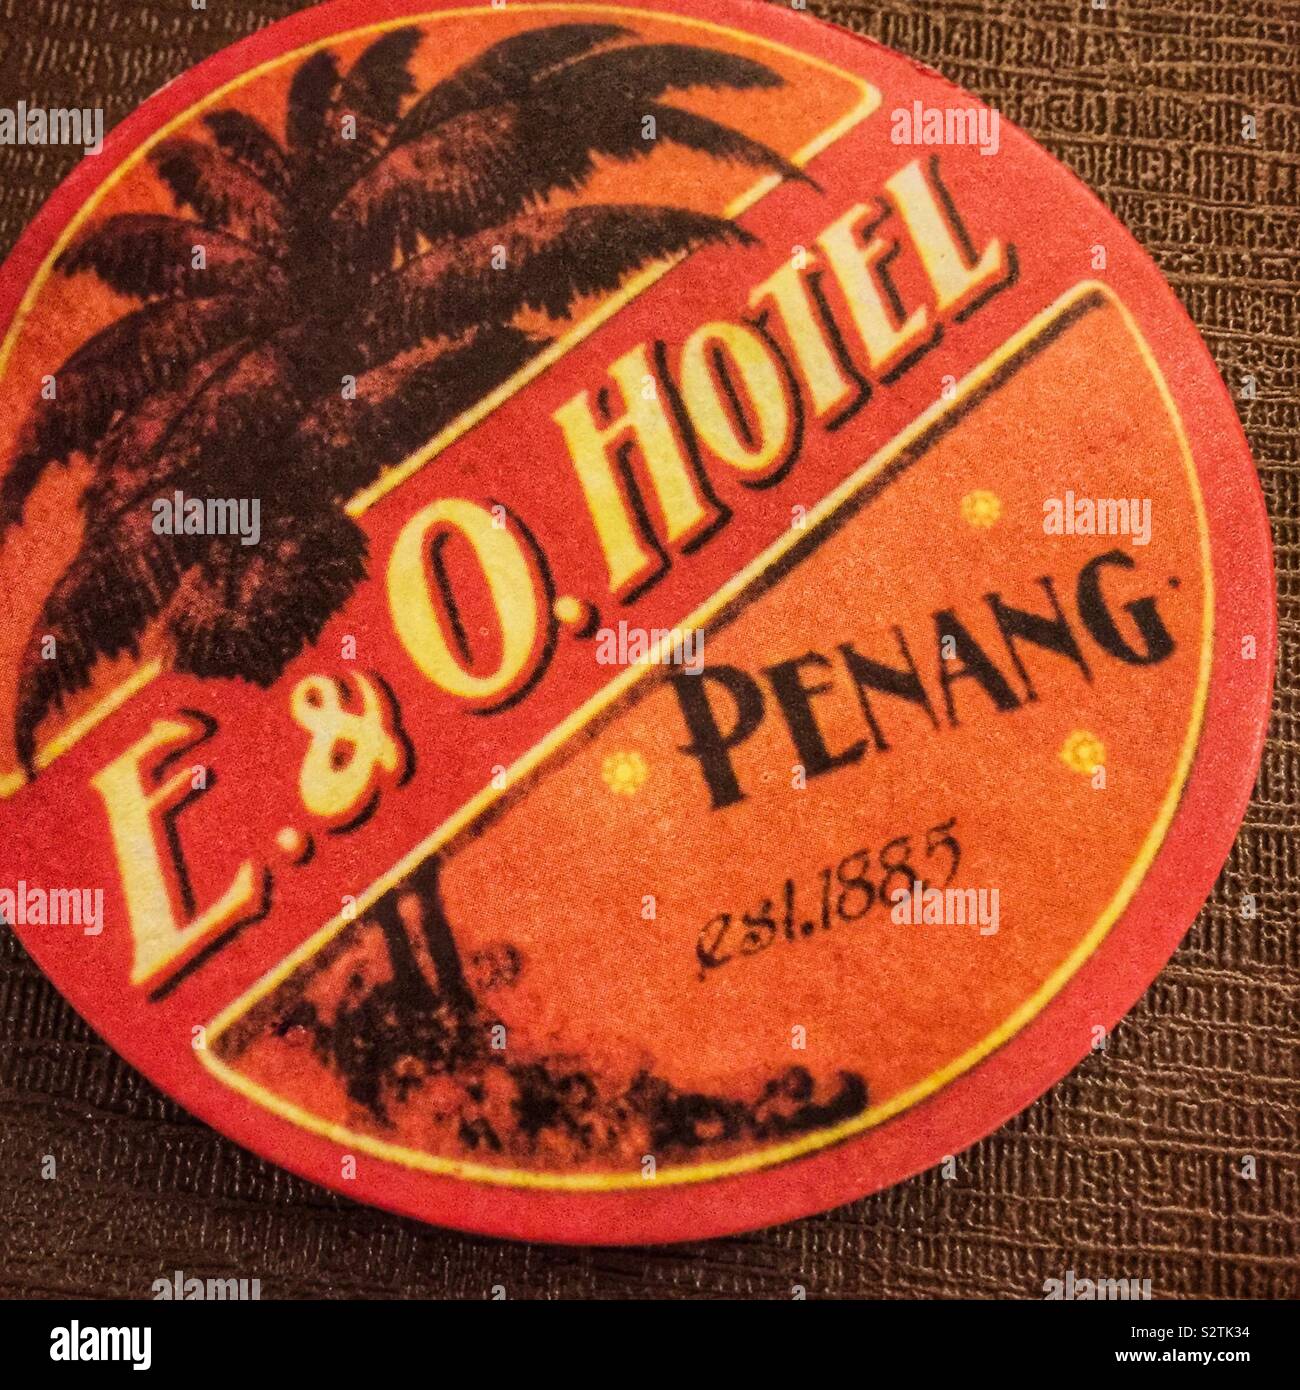 A drinks coaster from the Eastern & Oriental Hotel, George Town, Penang, Malaysia Stock Photo